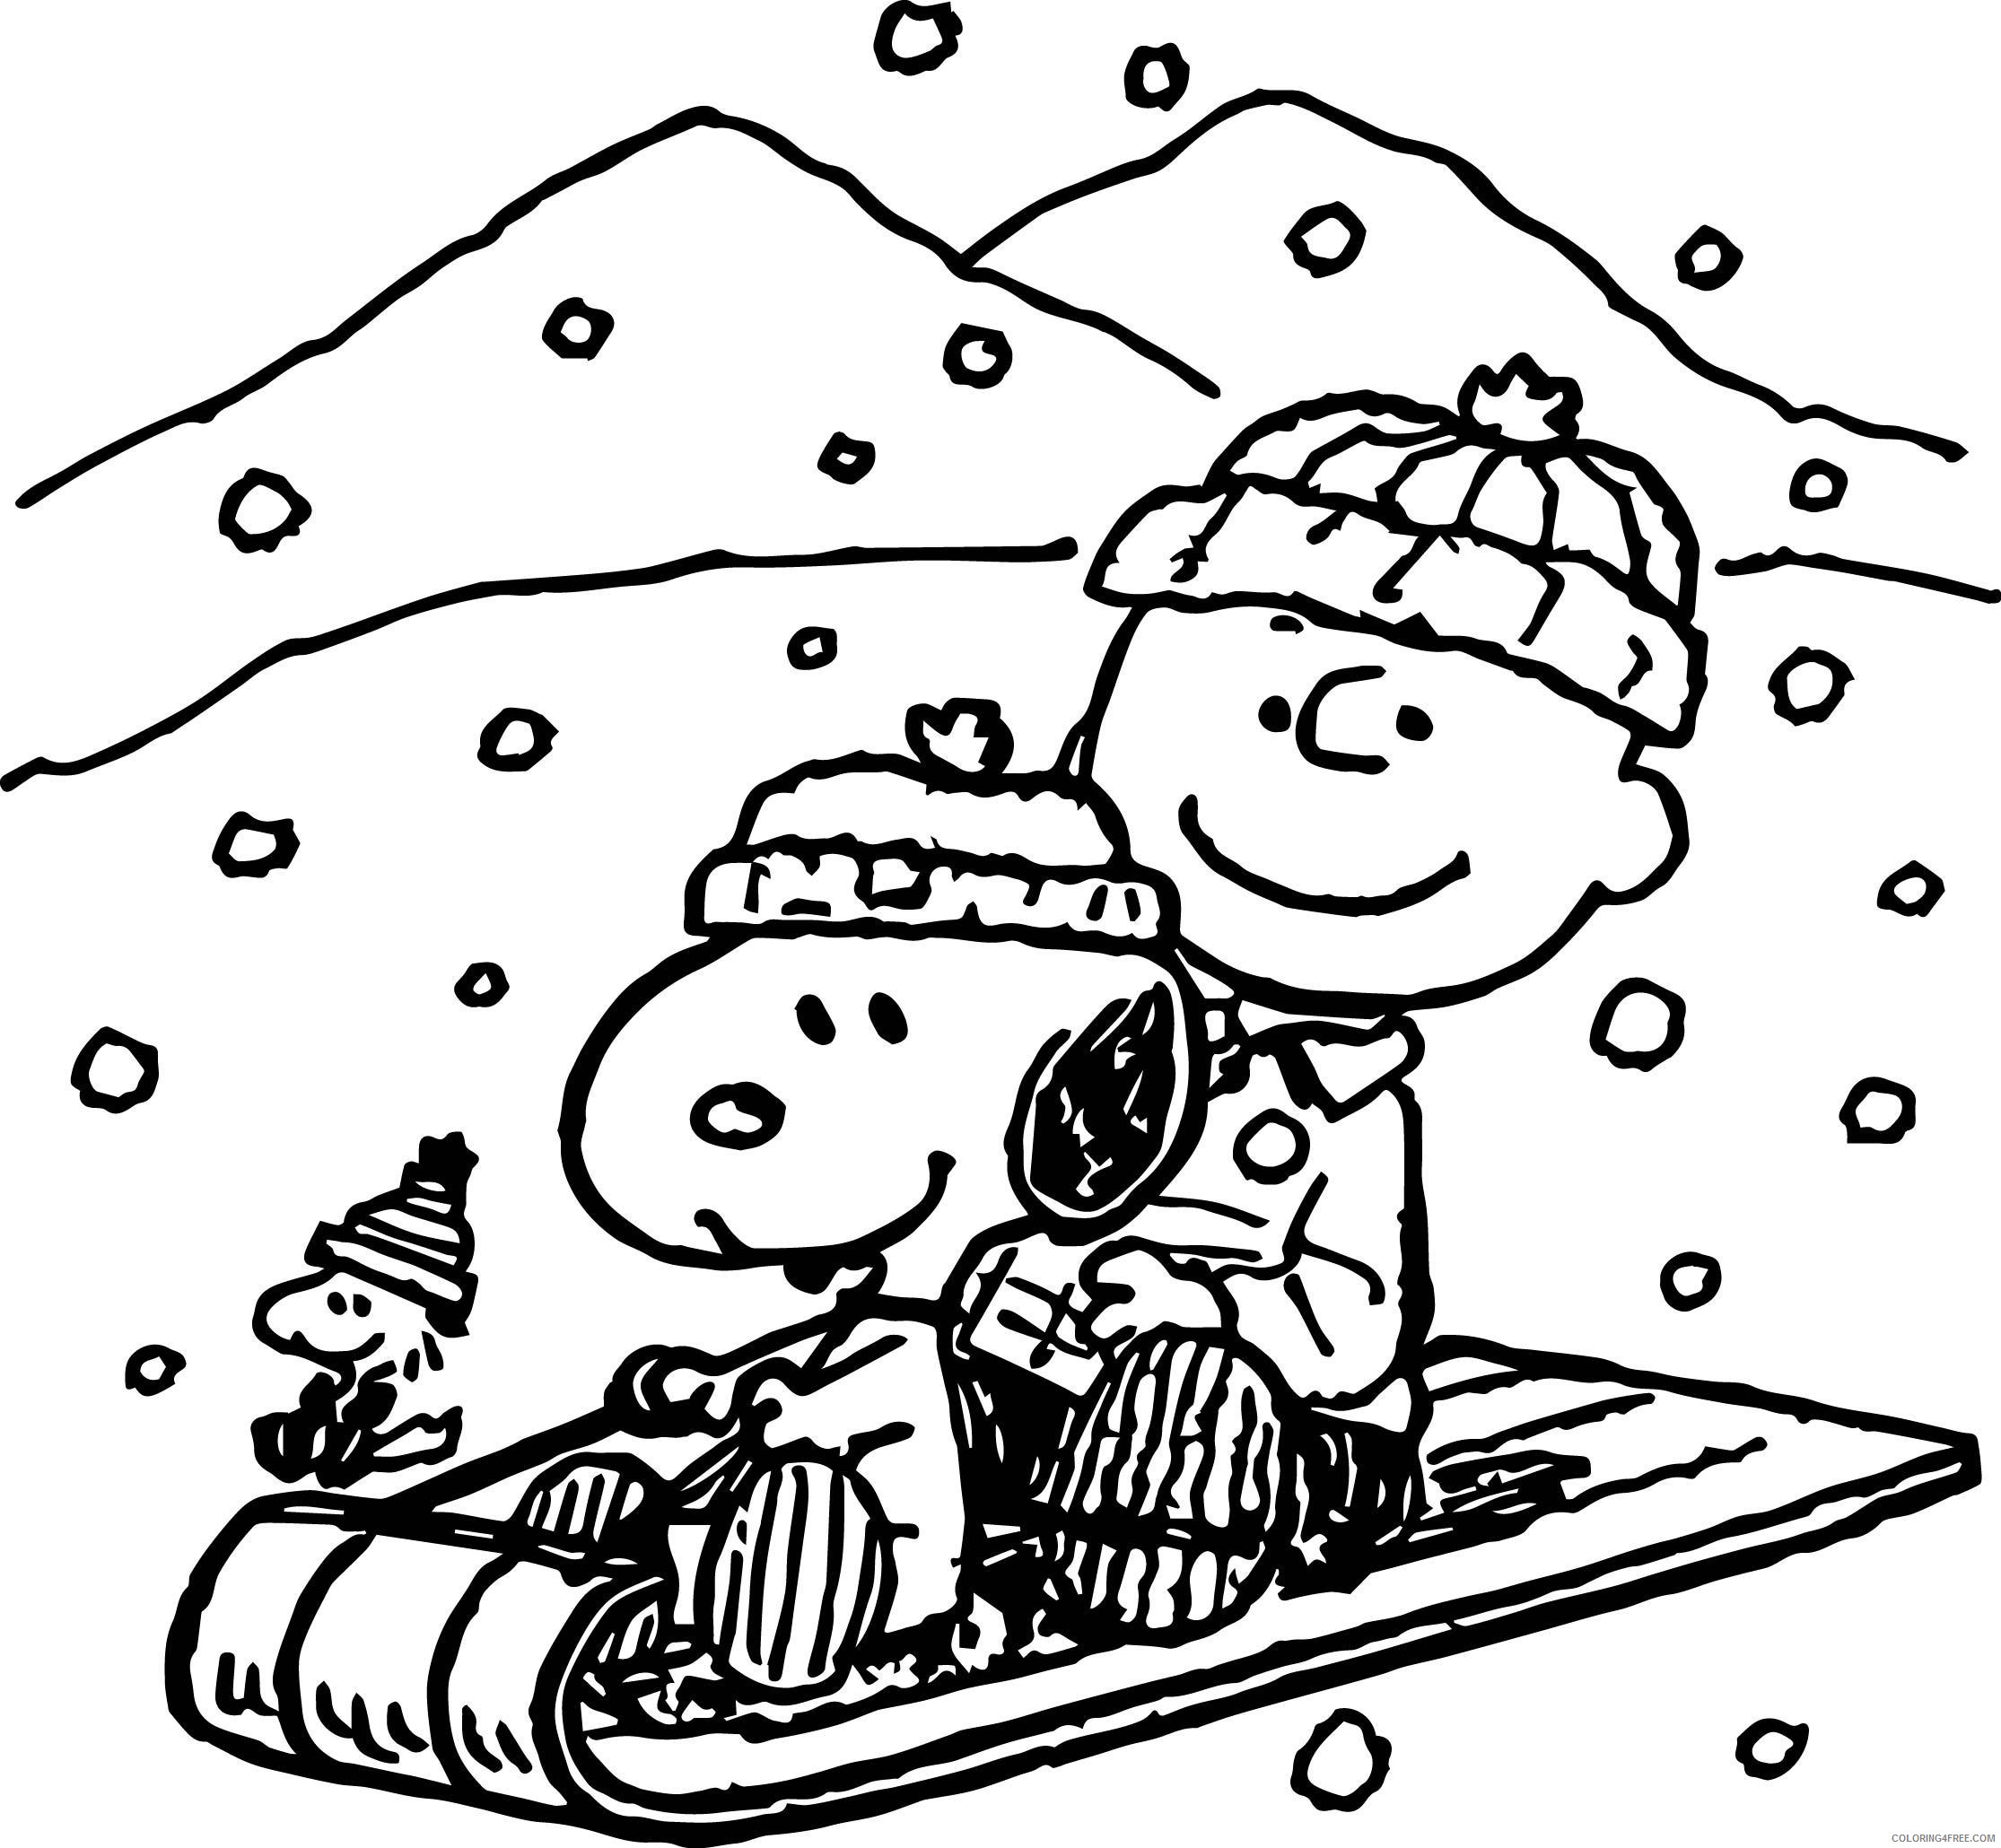 Snoopy Coloring Pages Cartoons 1539418009_snoopy for kids cool snoppy acpra in napisy snoopy Printable 2020 5630 Coloring4free